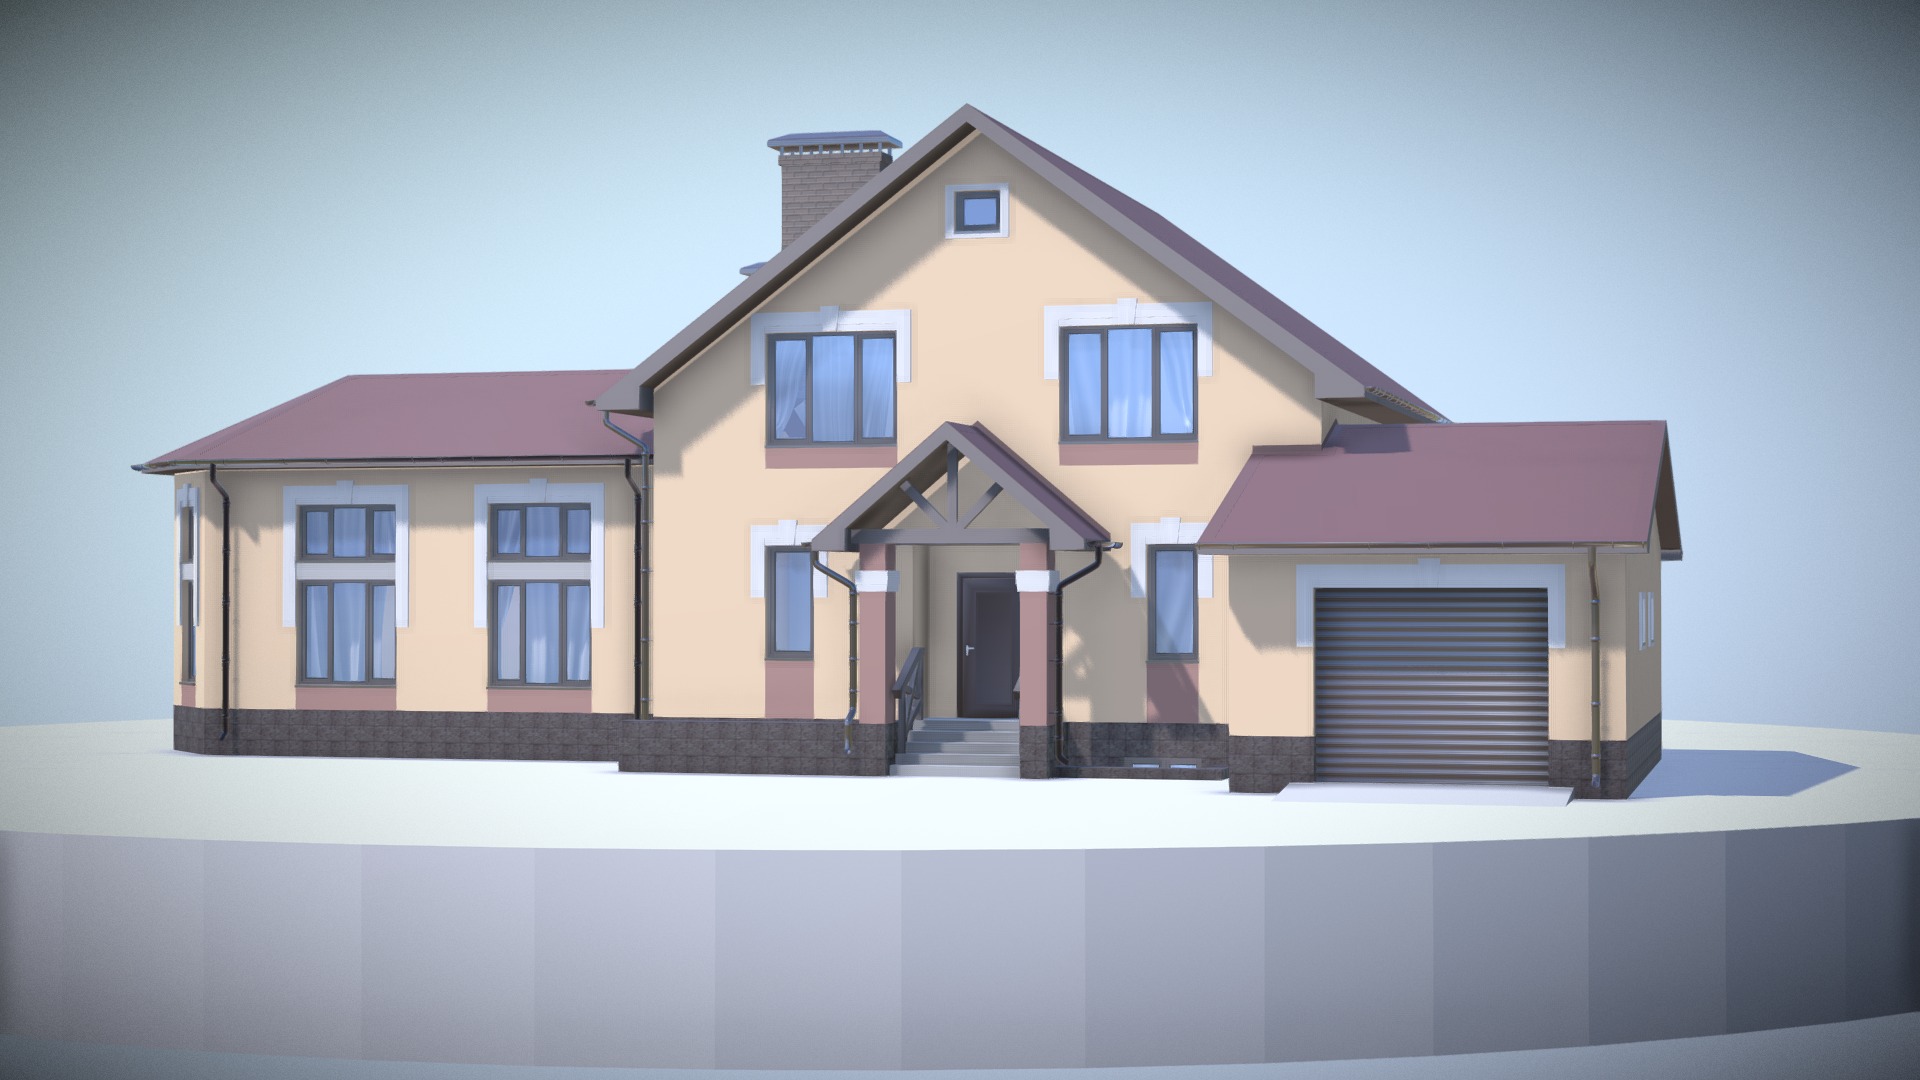 3D model Проект дома 307-A - This is a 3D model of the Проект дома 307-A. The 3D model is about a house with a garage.